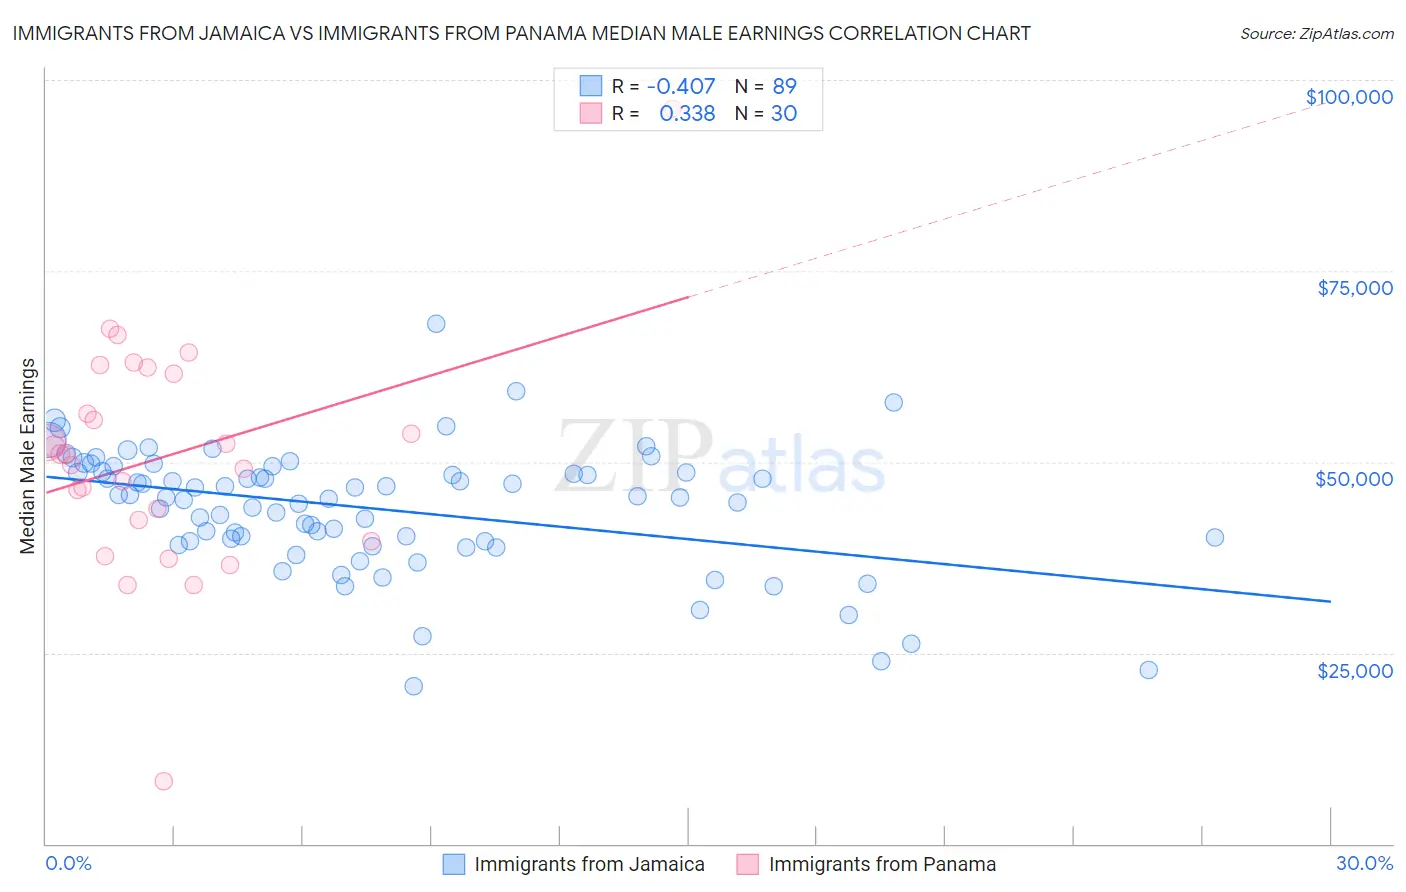 Immigrants from Jamaica vs Immigrants from Panama Median Male Earnings